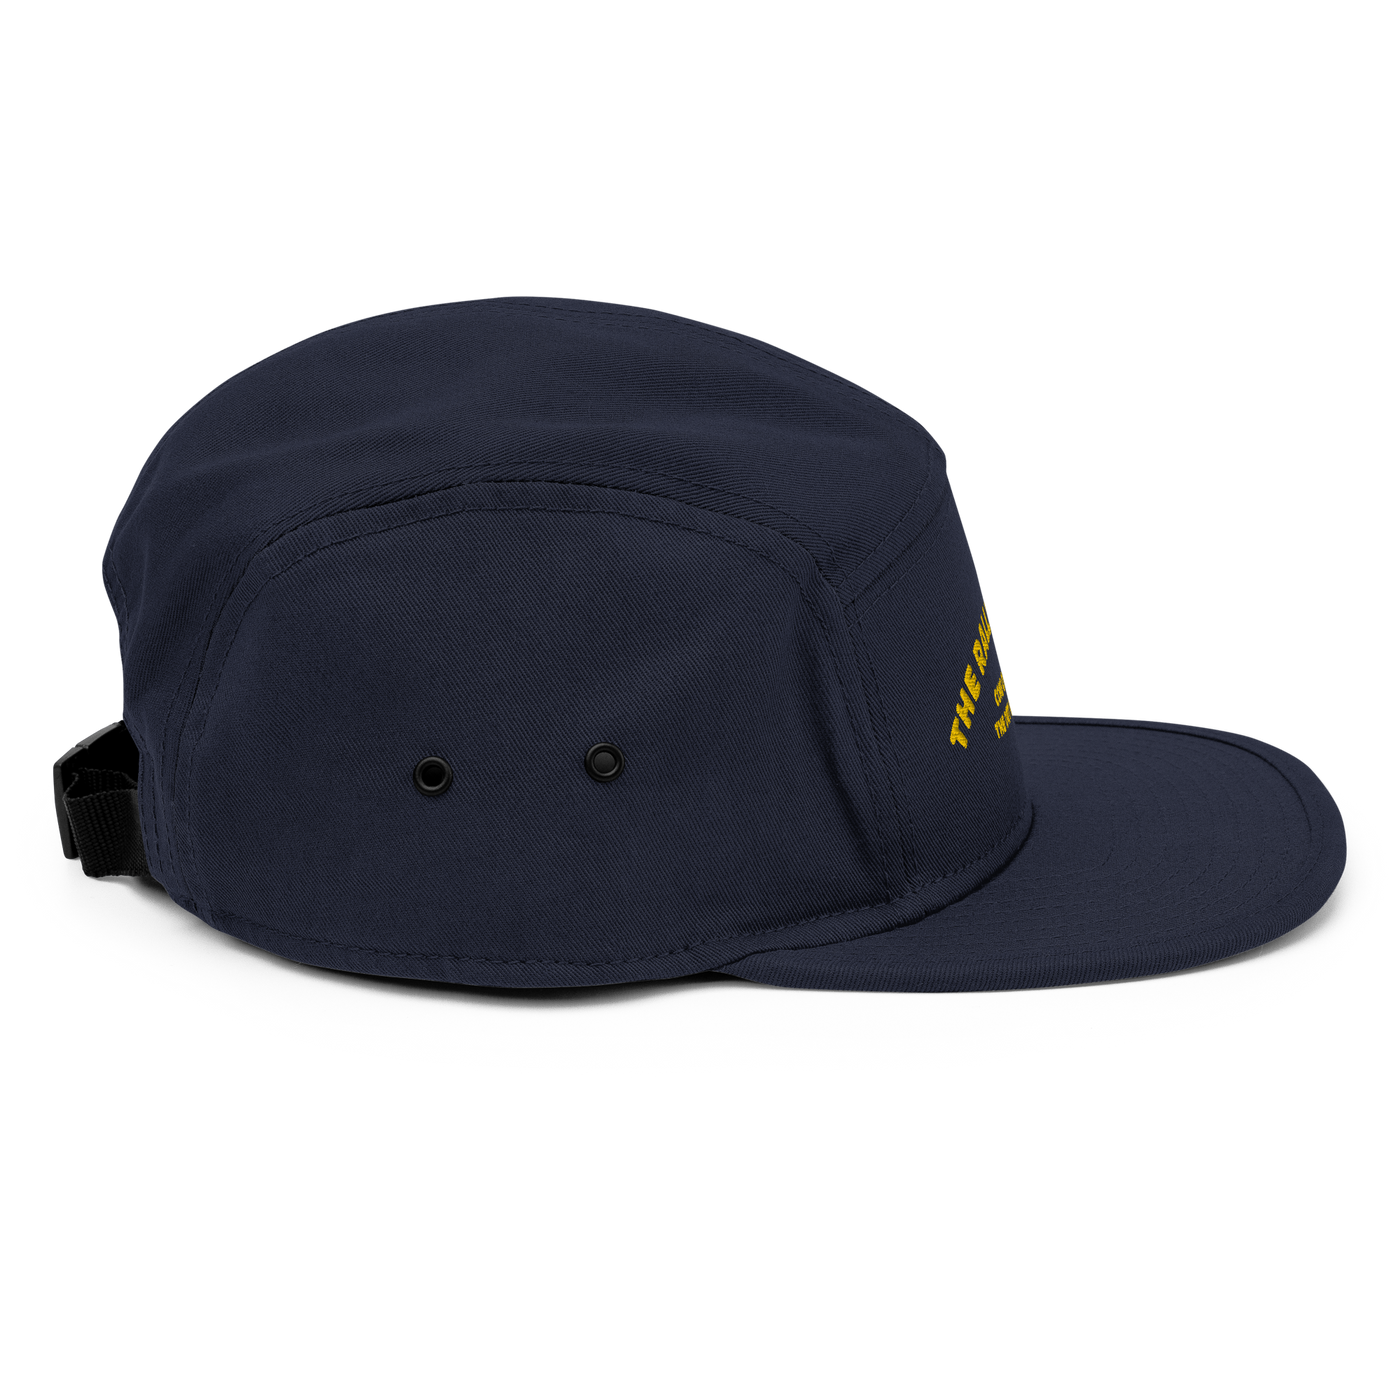 Rally Ranch 5 Panel Camper Hat